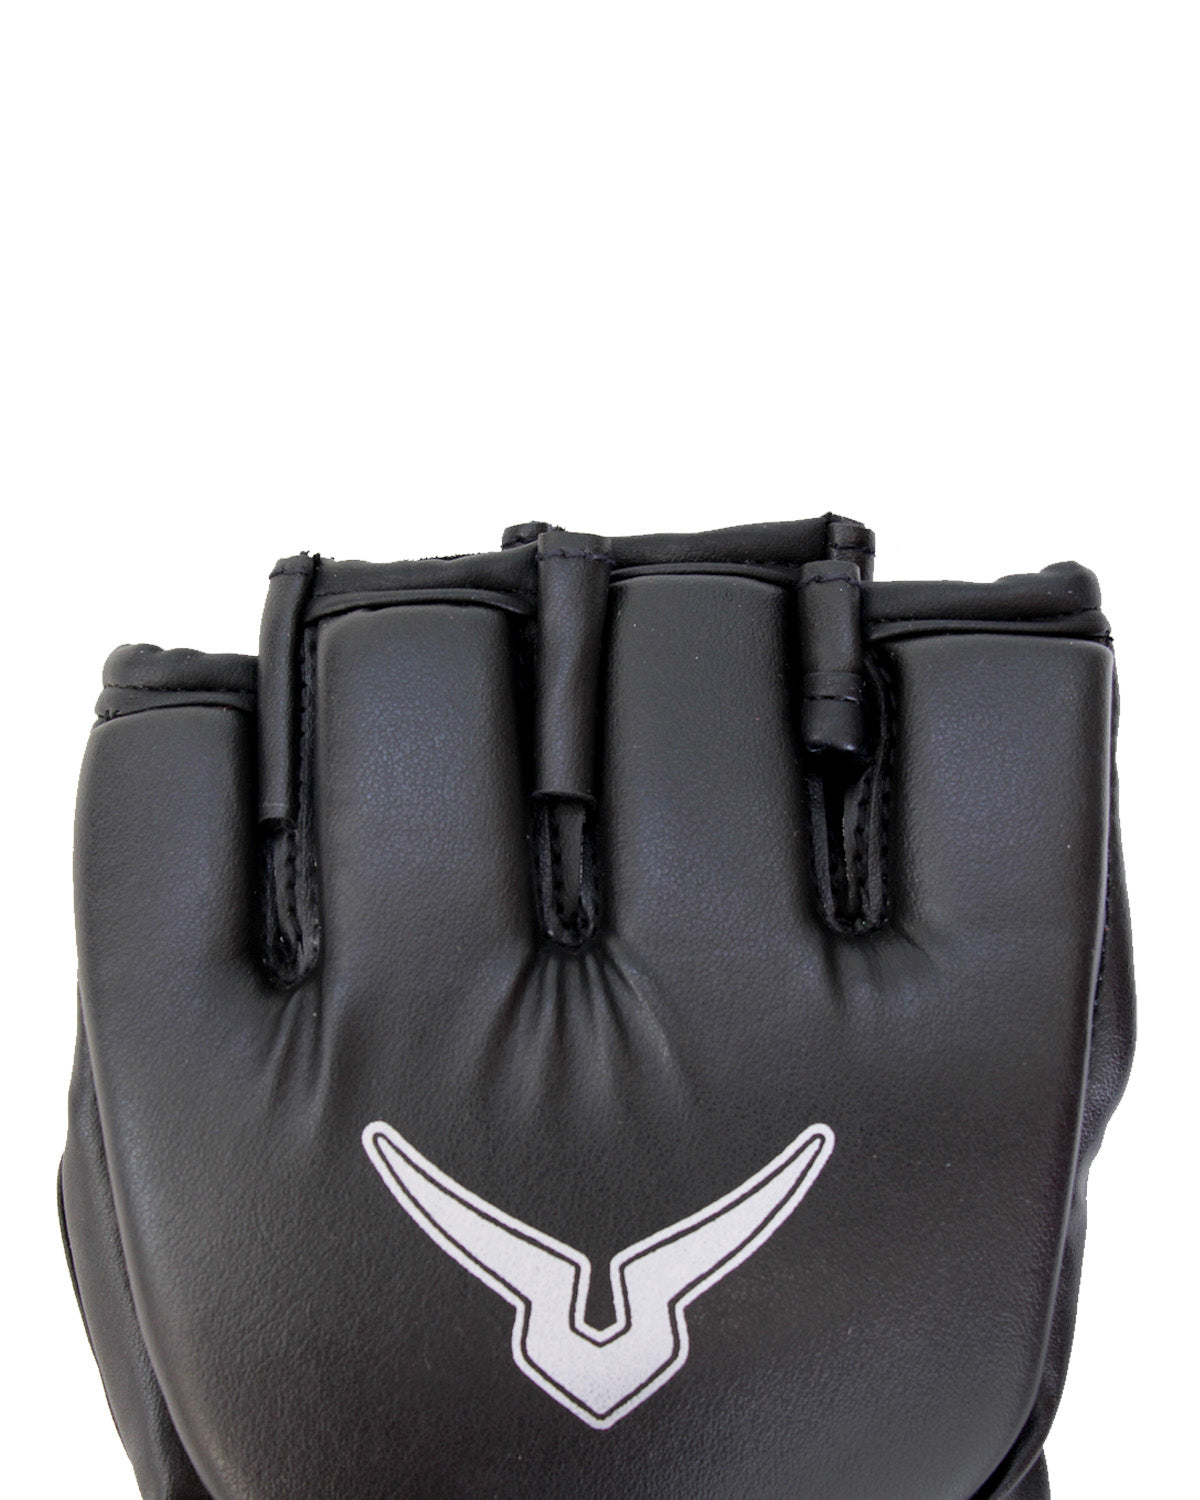 Invincible MMA Combat Gloves - Quality for Ultimate Performance in Mixed Martial Arts Fight